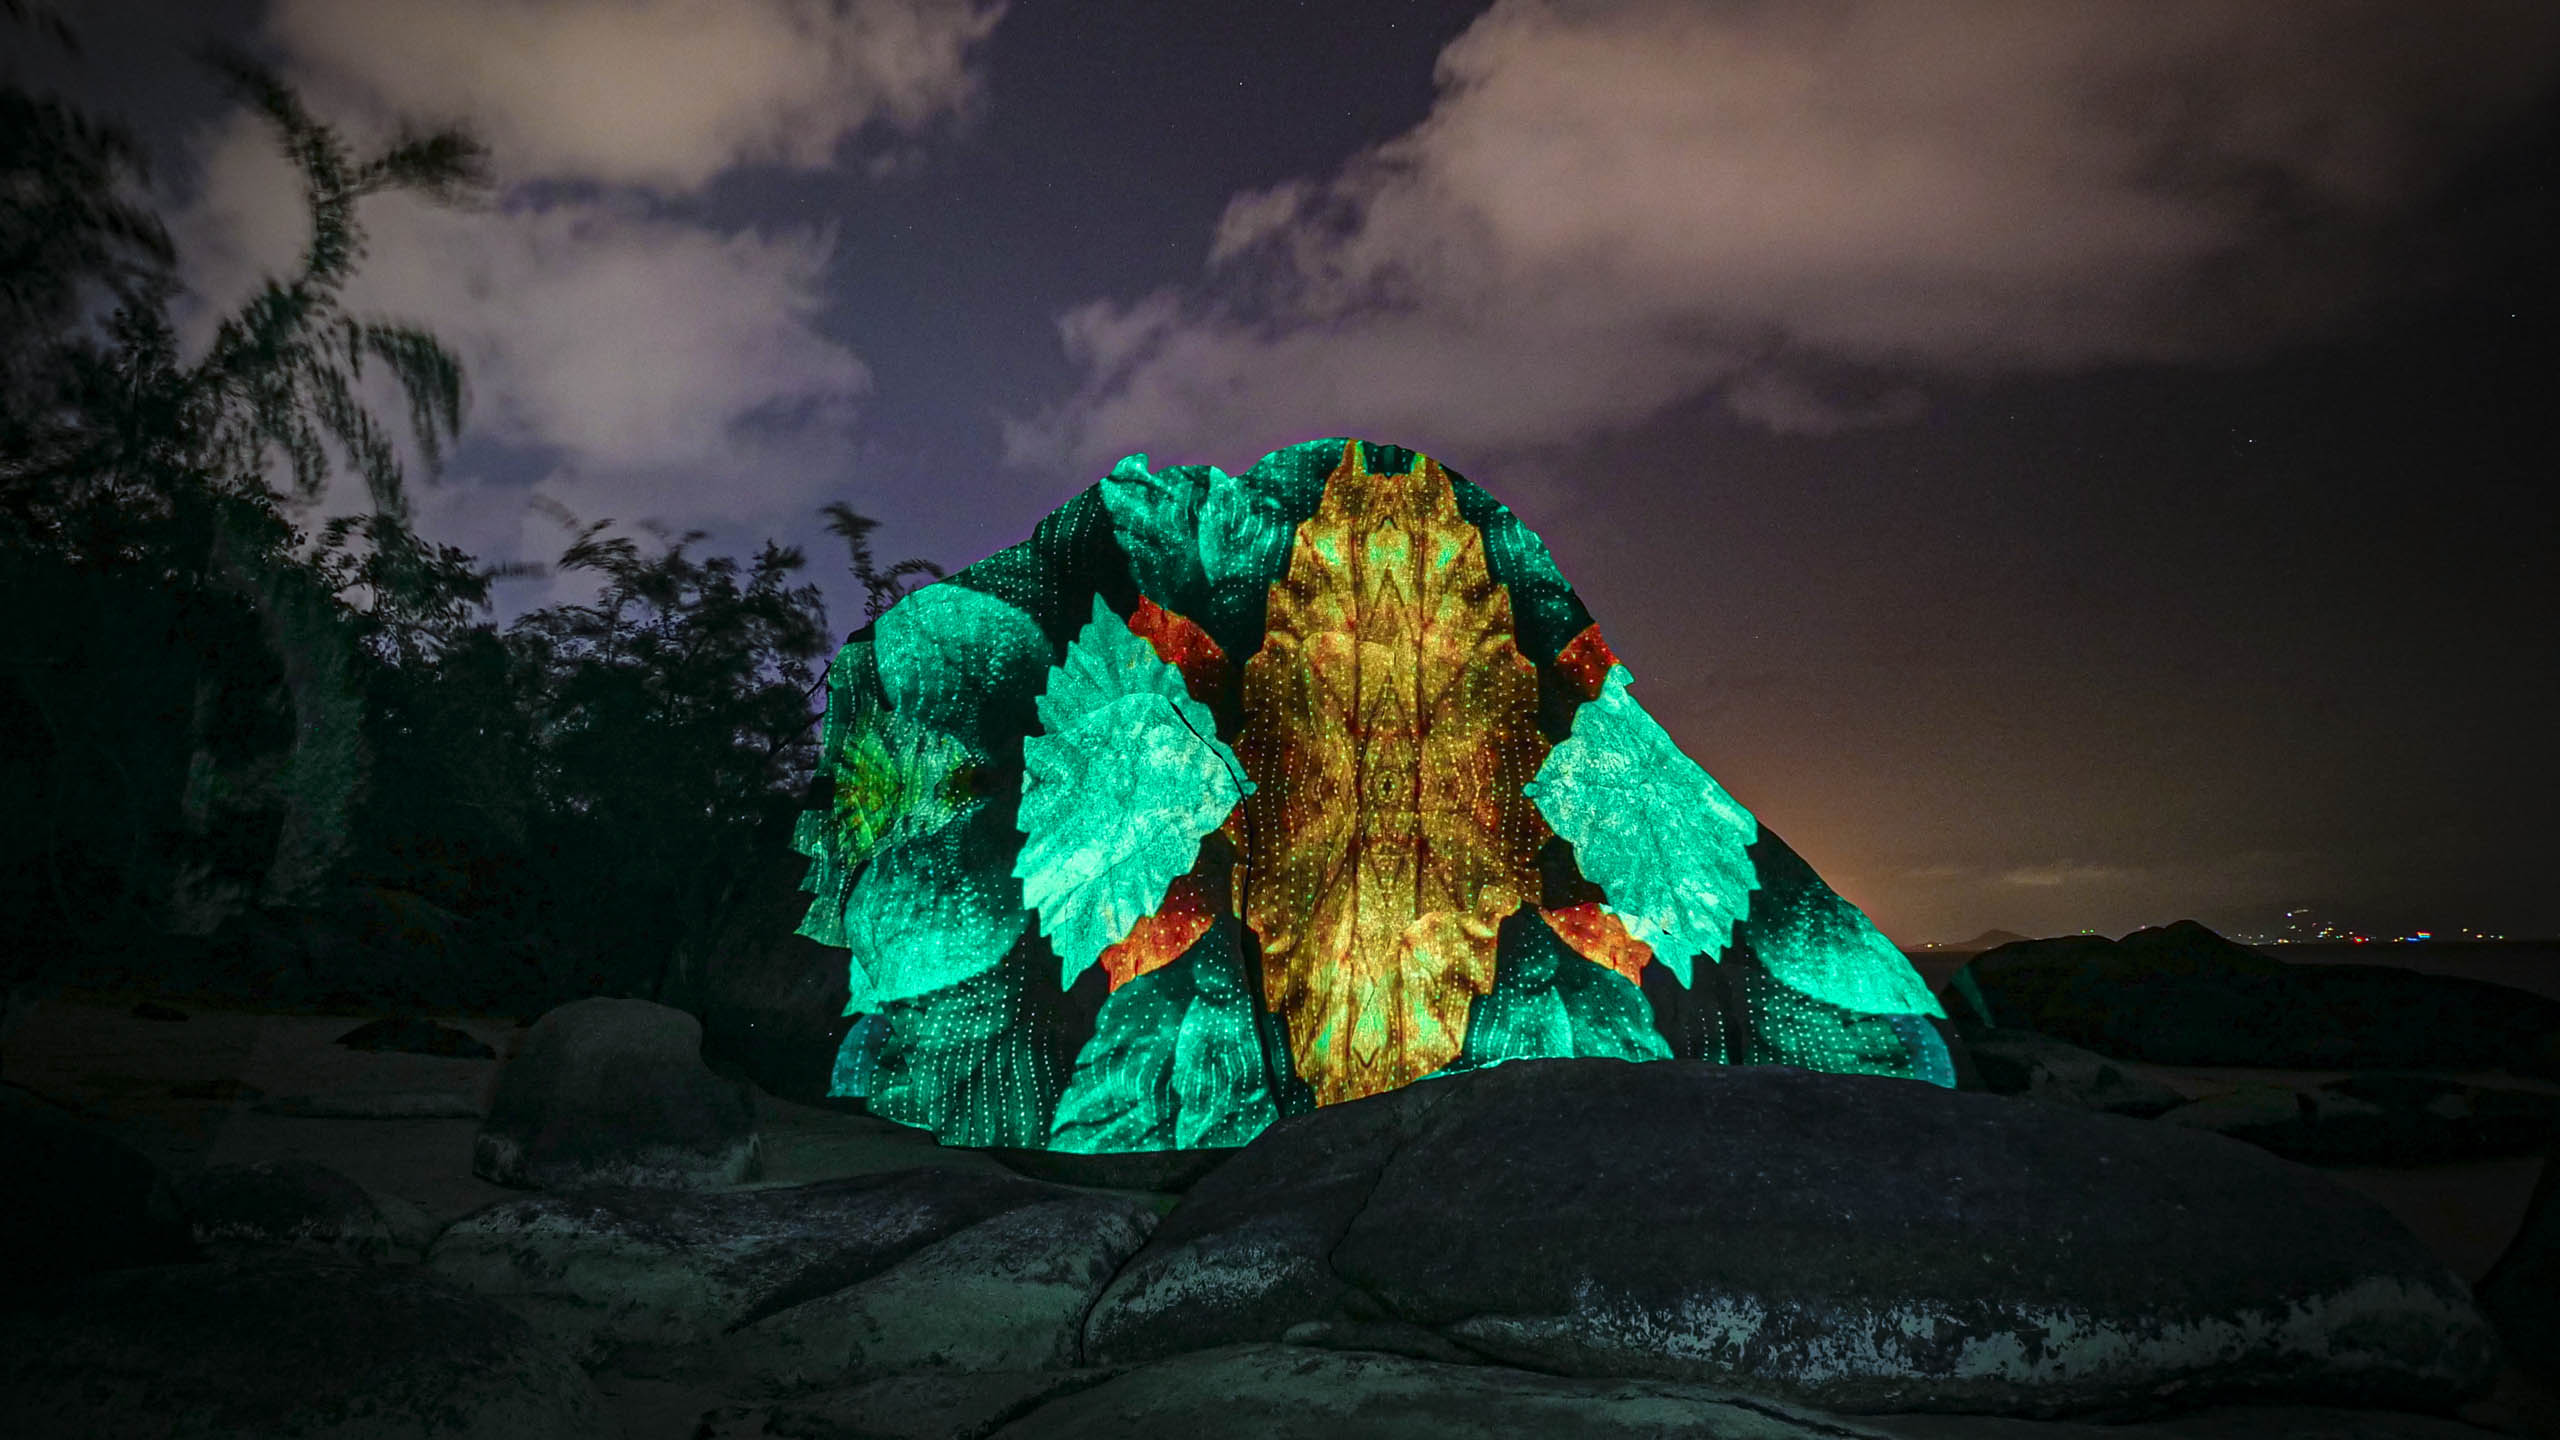 light art, 3d projection mapping with nature elements and green colors by philipp frank. Located on a rock at the beach